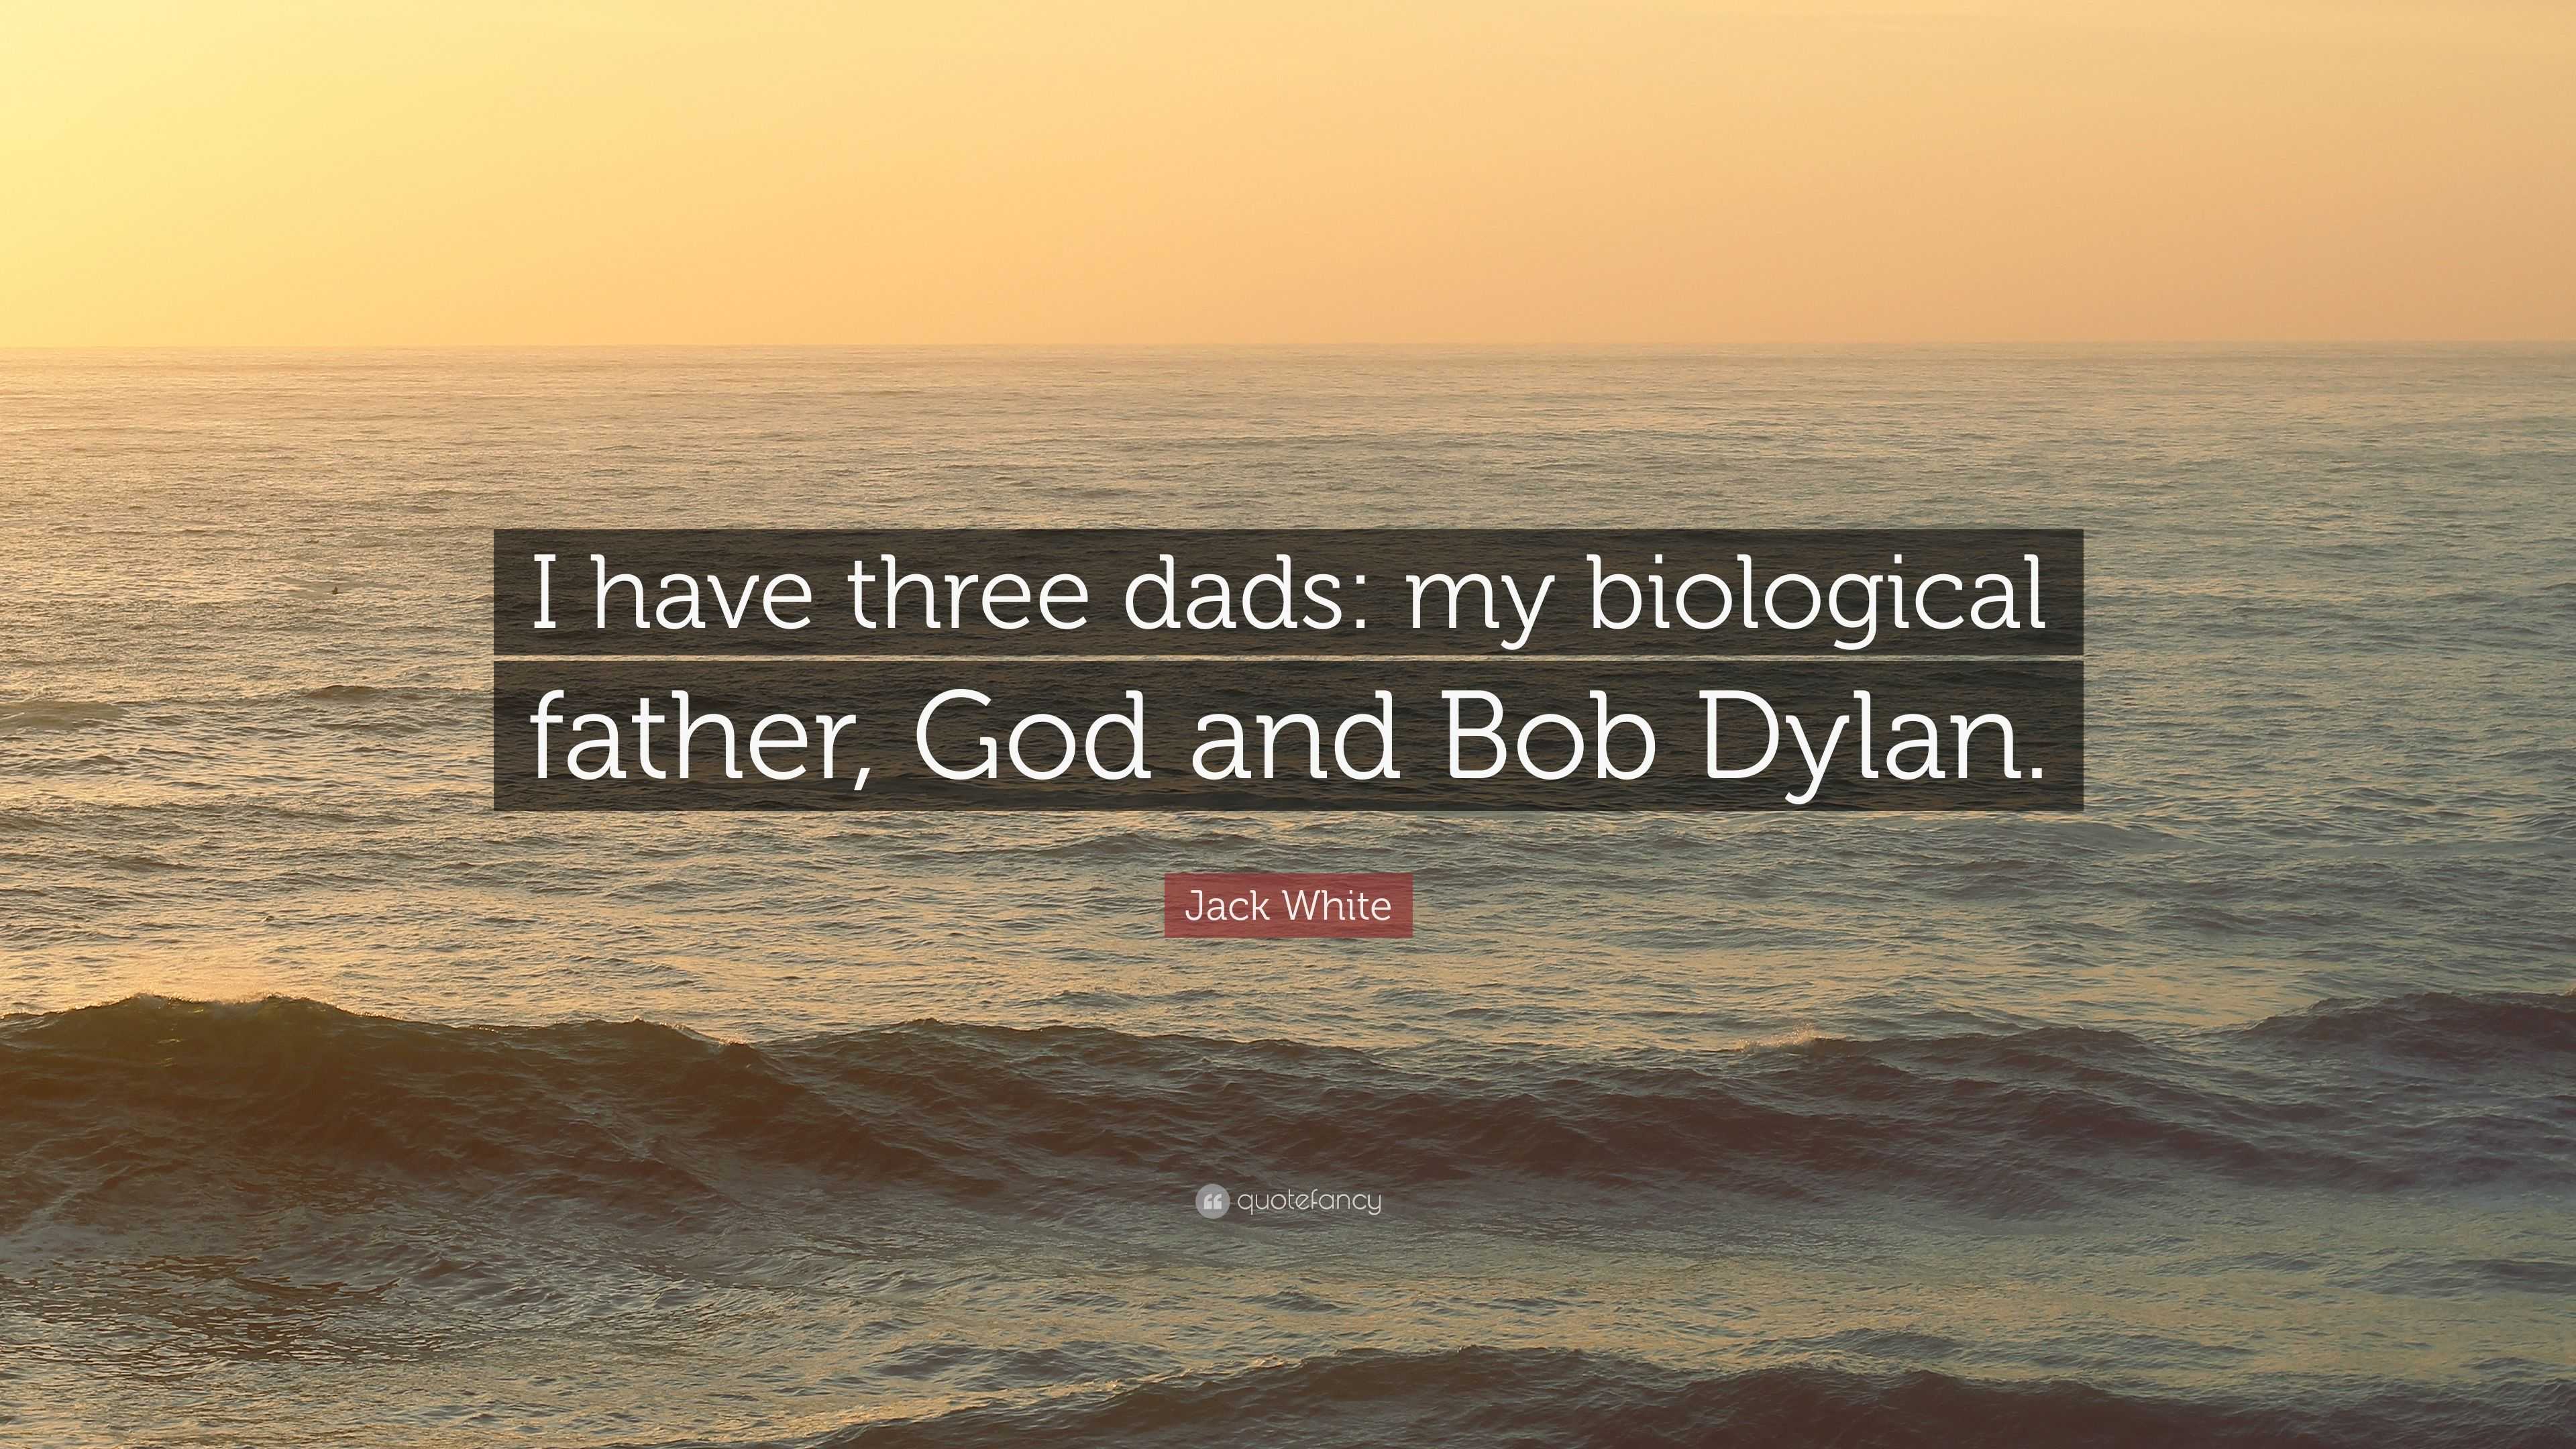 Jack White Quote: “I have three dads: my biological father, God and Bob  Dylan.”